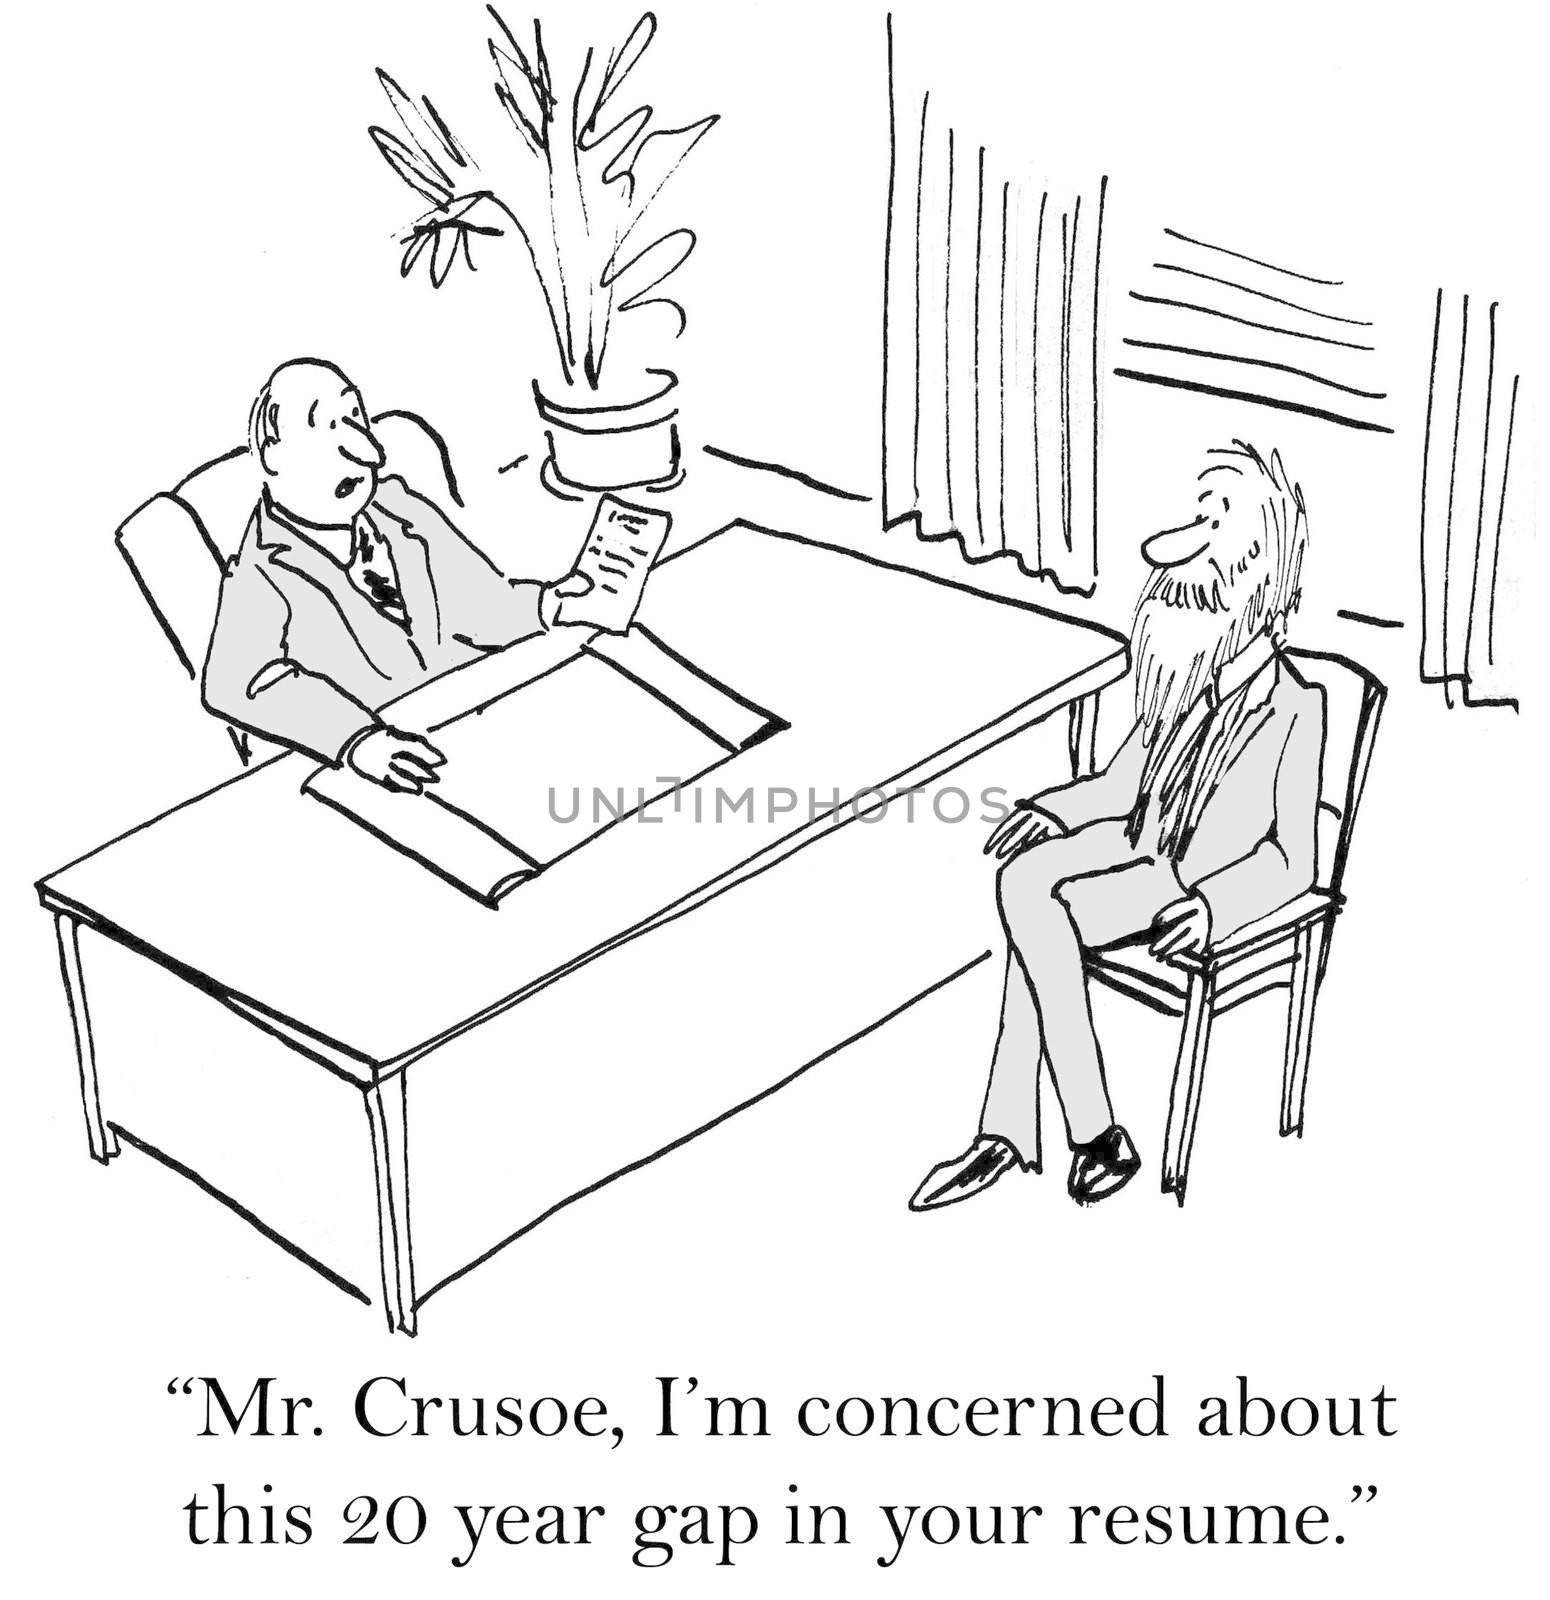 "Mr. Crusoe, I'm concerned about this 20 year gap in your resume."